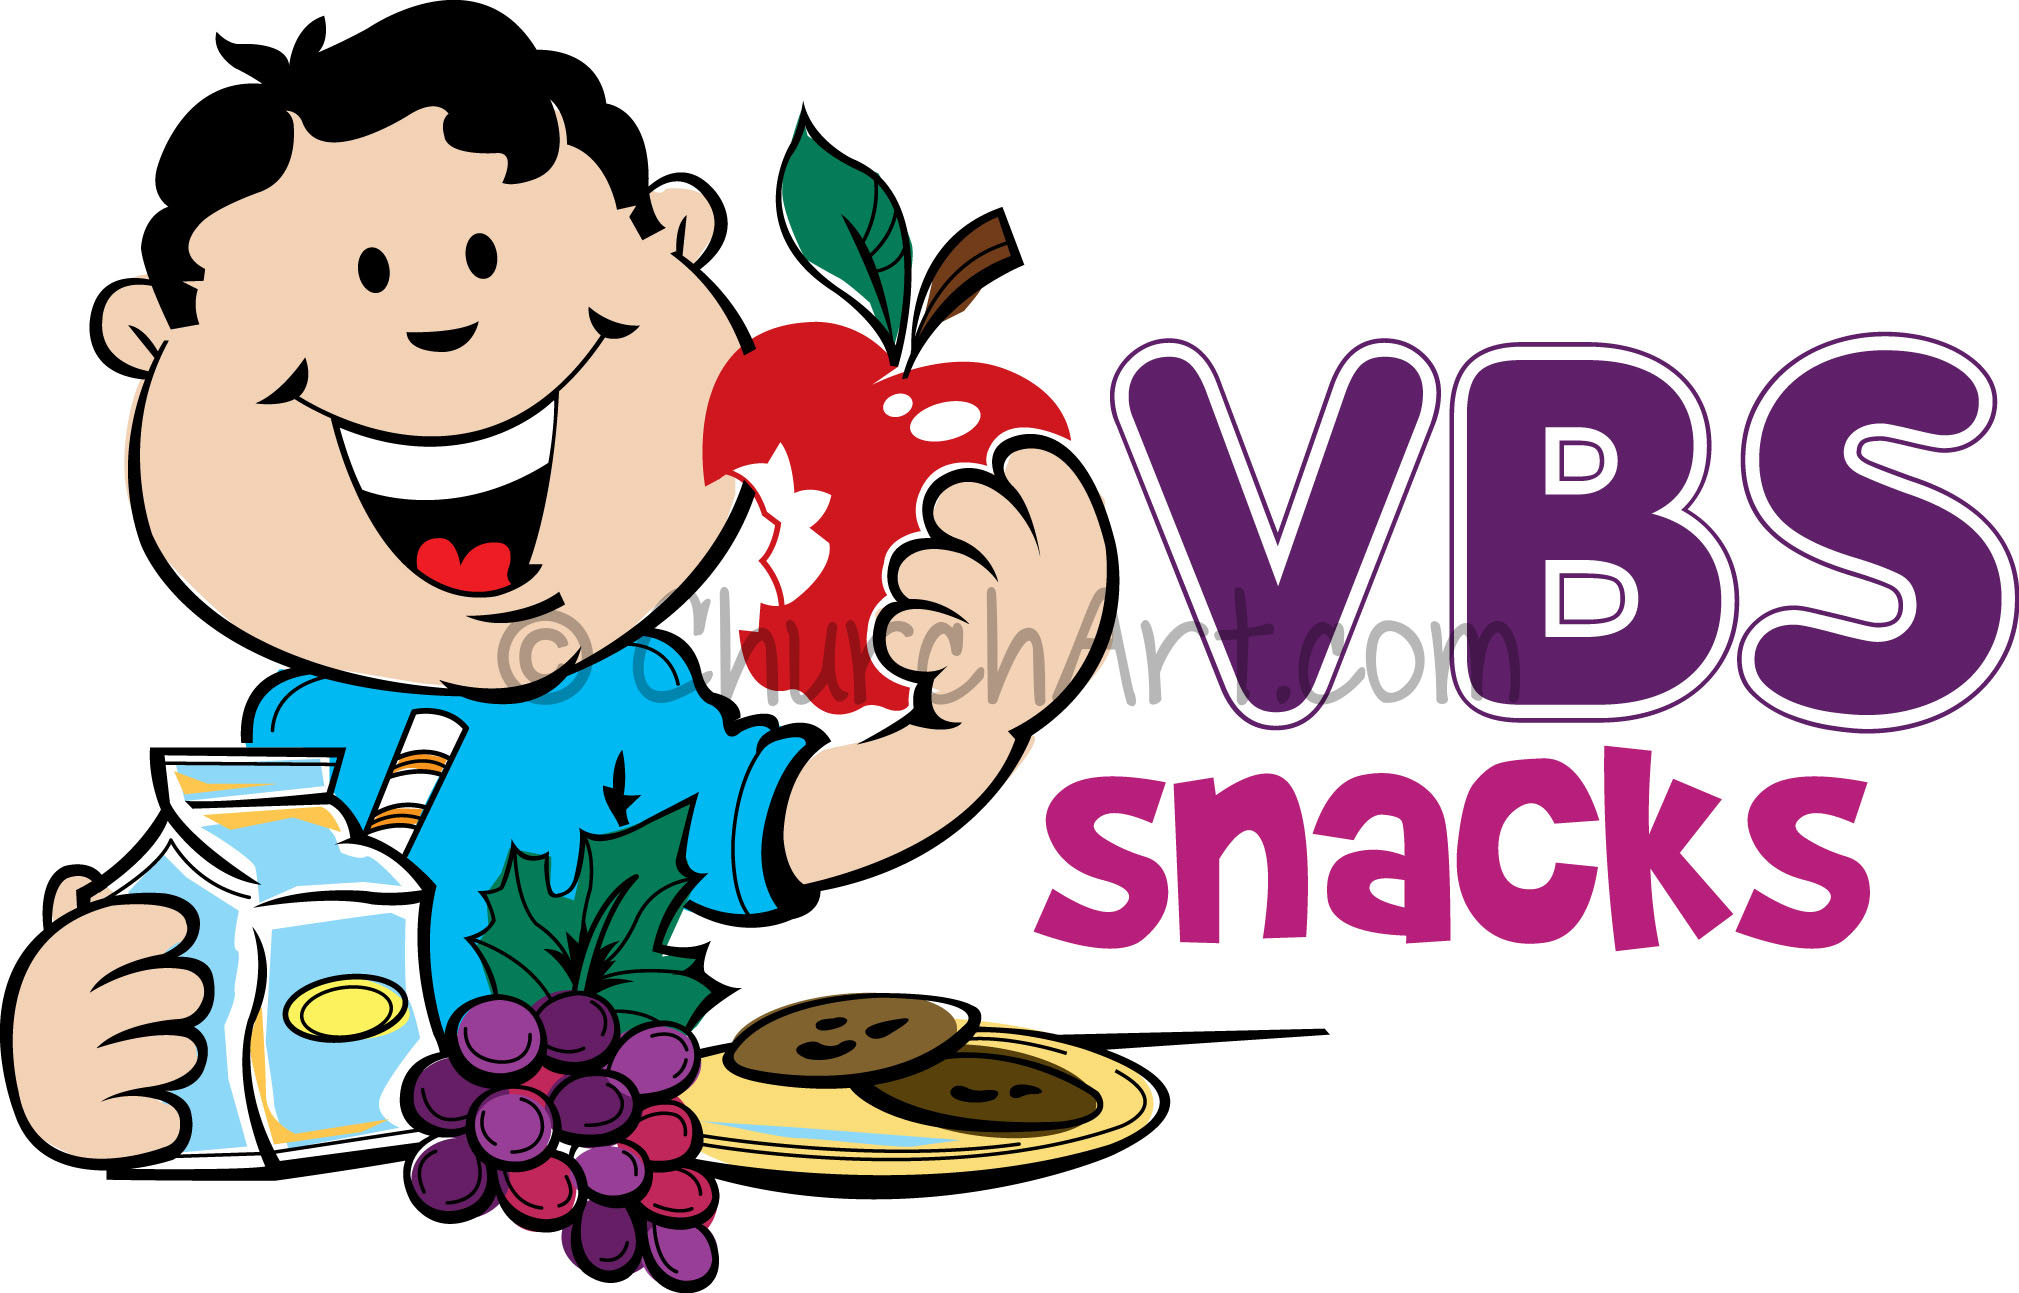 VBS snacks image for parents